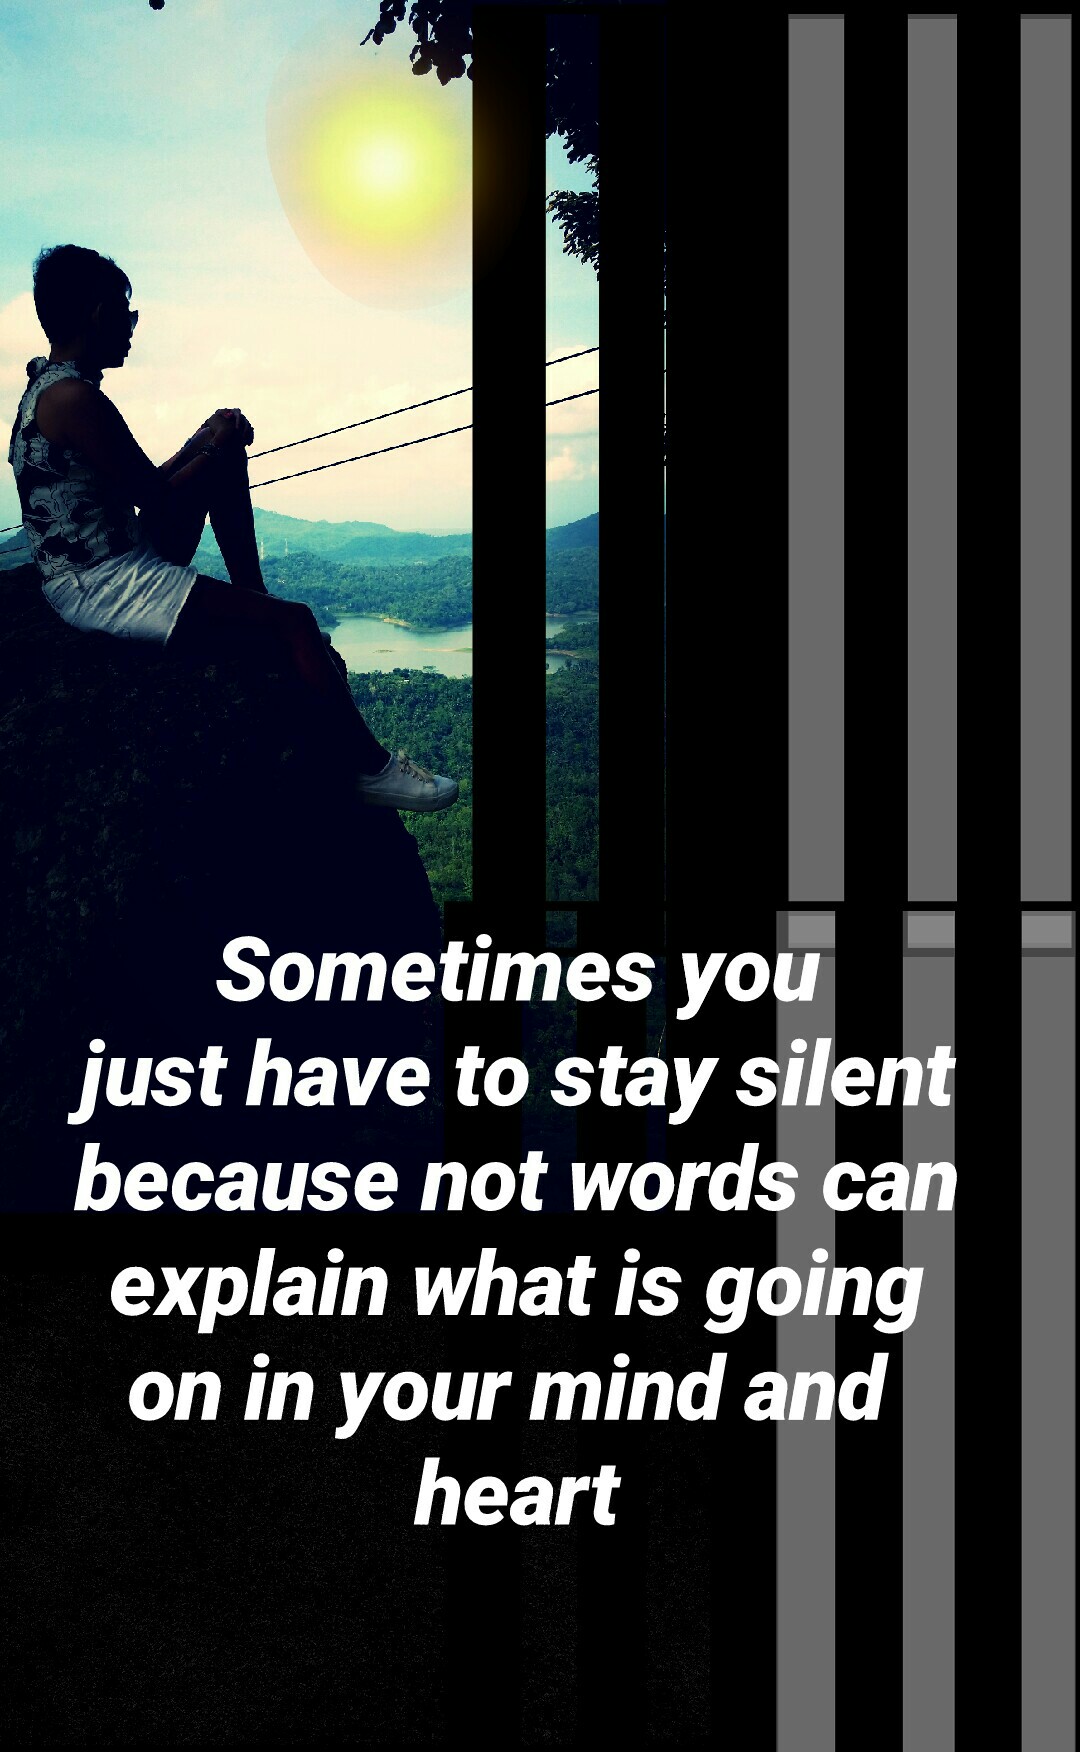 Sometimes you
just have to stay silent
because not words can
explain what is going
on in your mind and 
heart